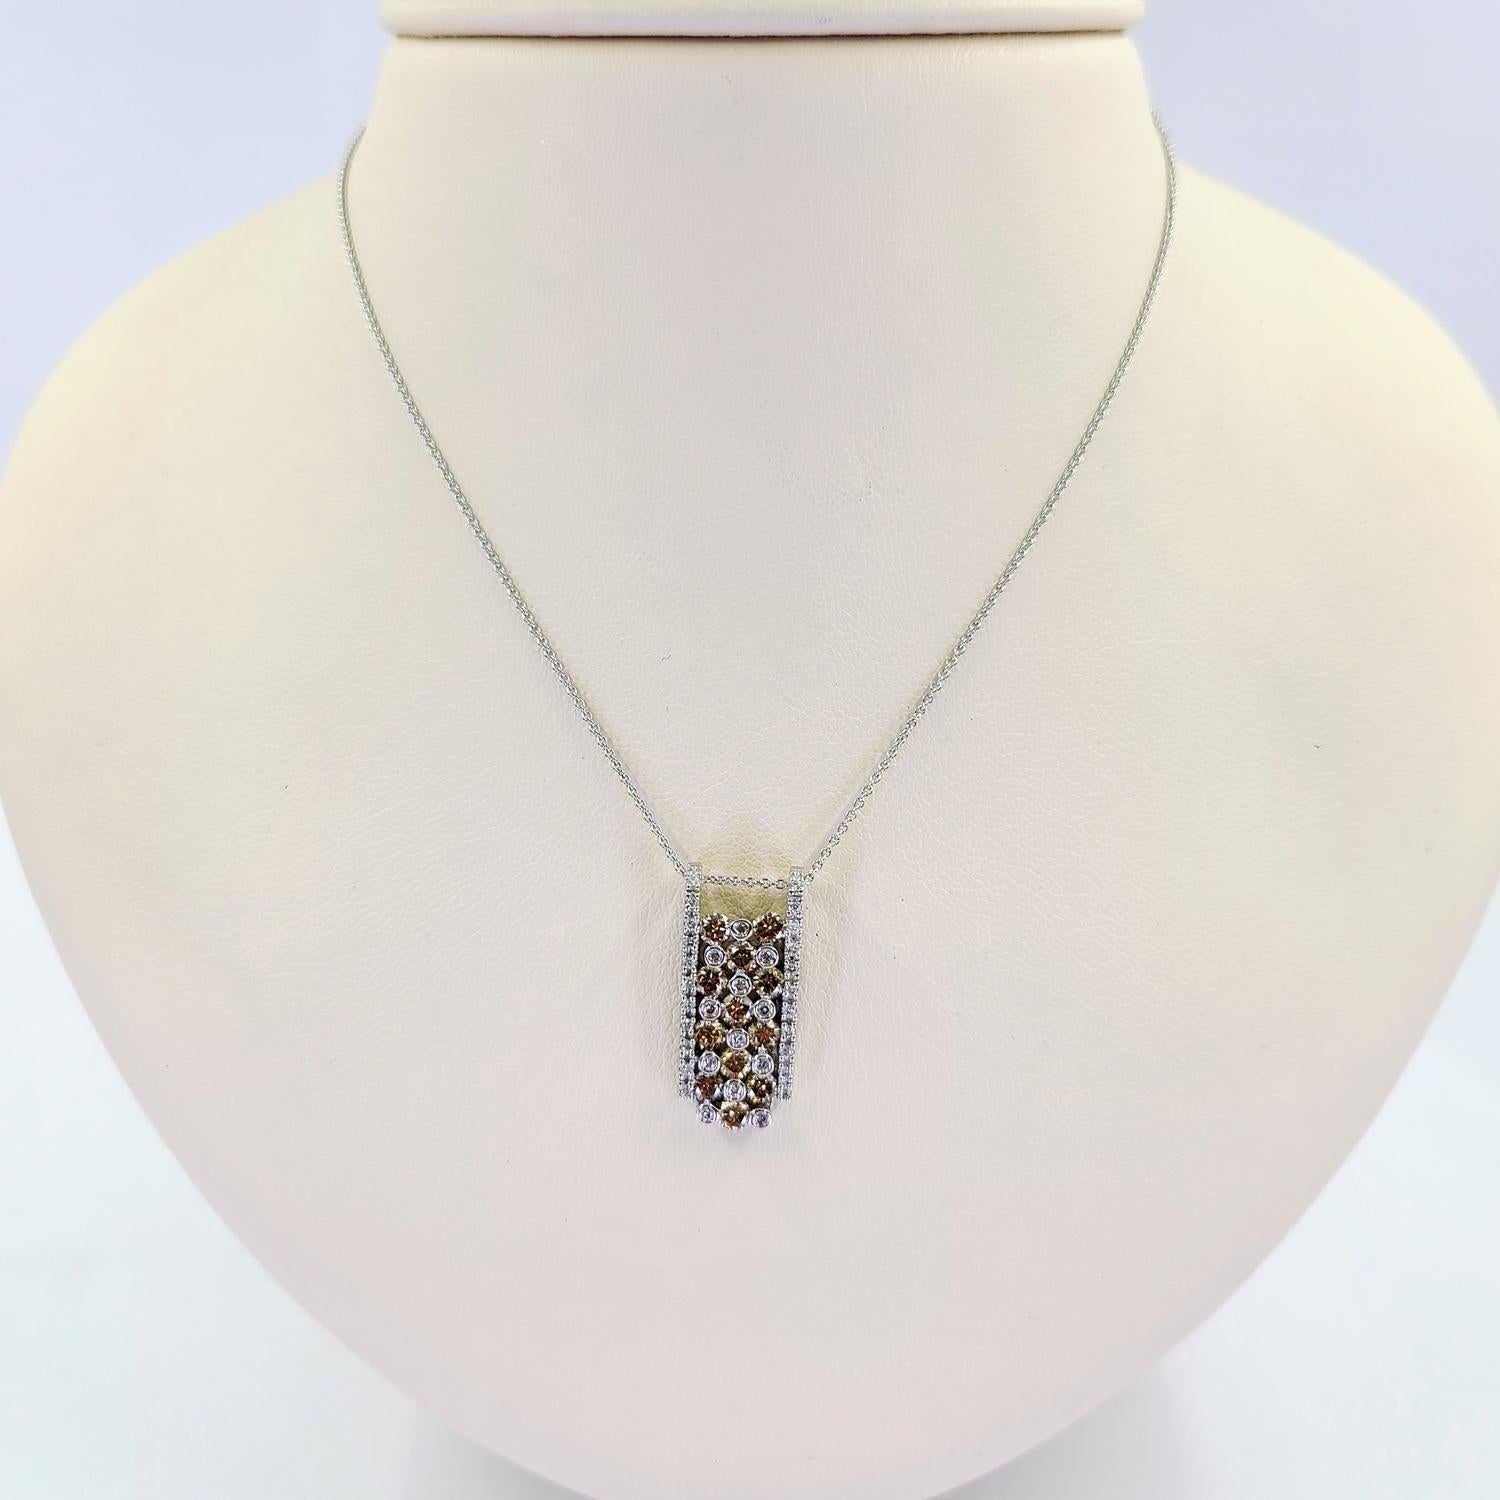 14 Karat White Gold Waterfall Pendant Necklace Featuring 34 Round Brilliant Cut Diamonds of SI Clarity and H/I Color Totaling 0.17 Carats Accented by 12 Round Brilliant Cut Brown Diamonds of VS Clarity Totaling Approximately 1.20 Carats. 16 Inch